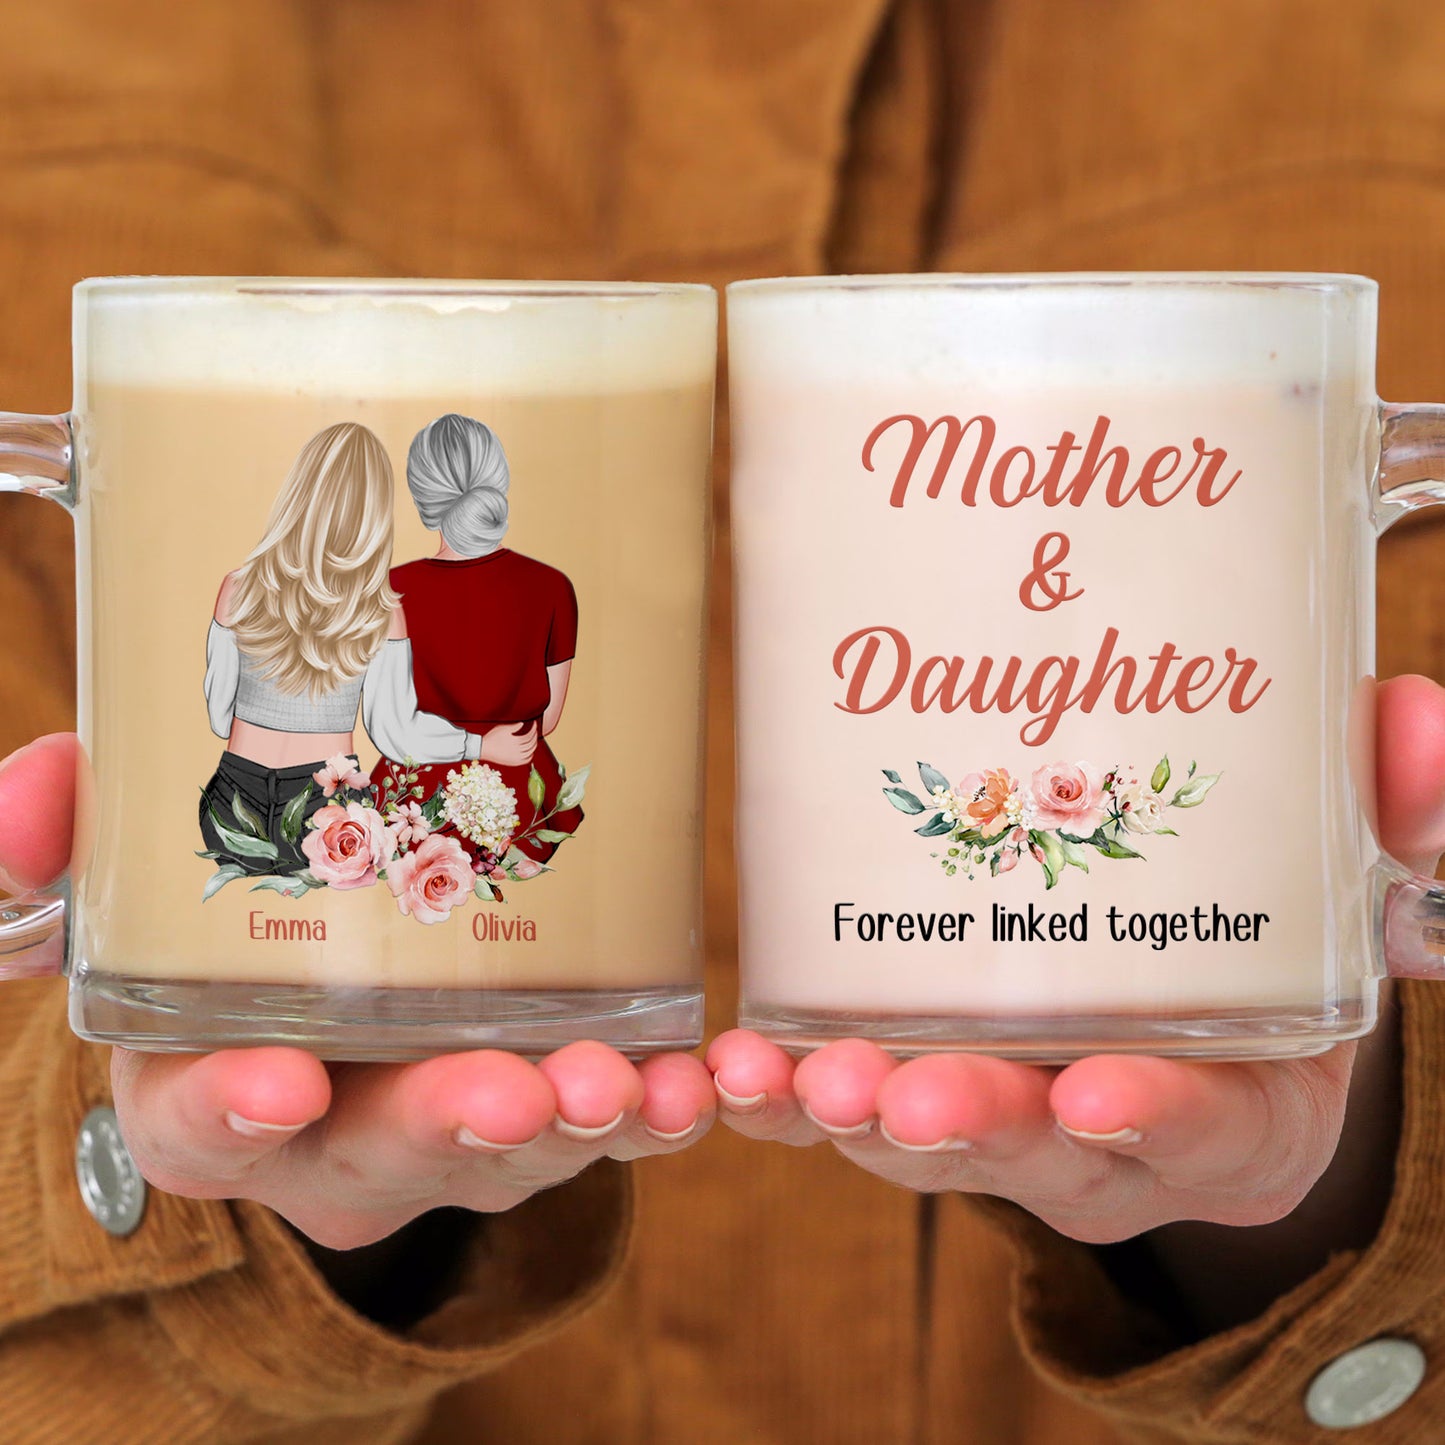 Mother And Daughter Forever Linked Together - Personalized Glass Mug